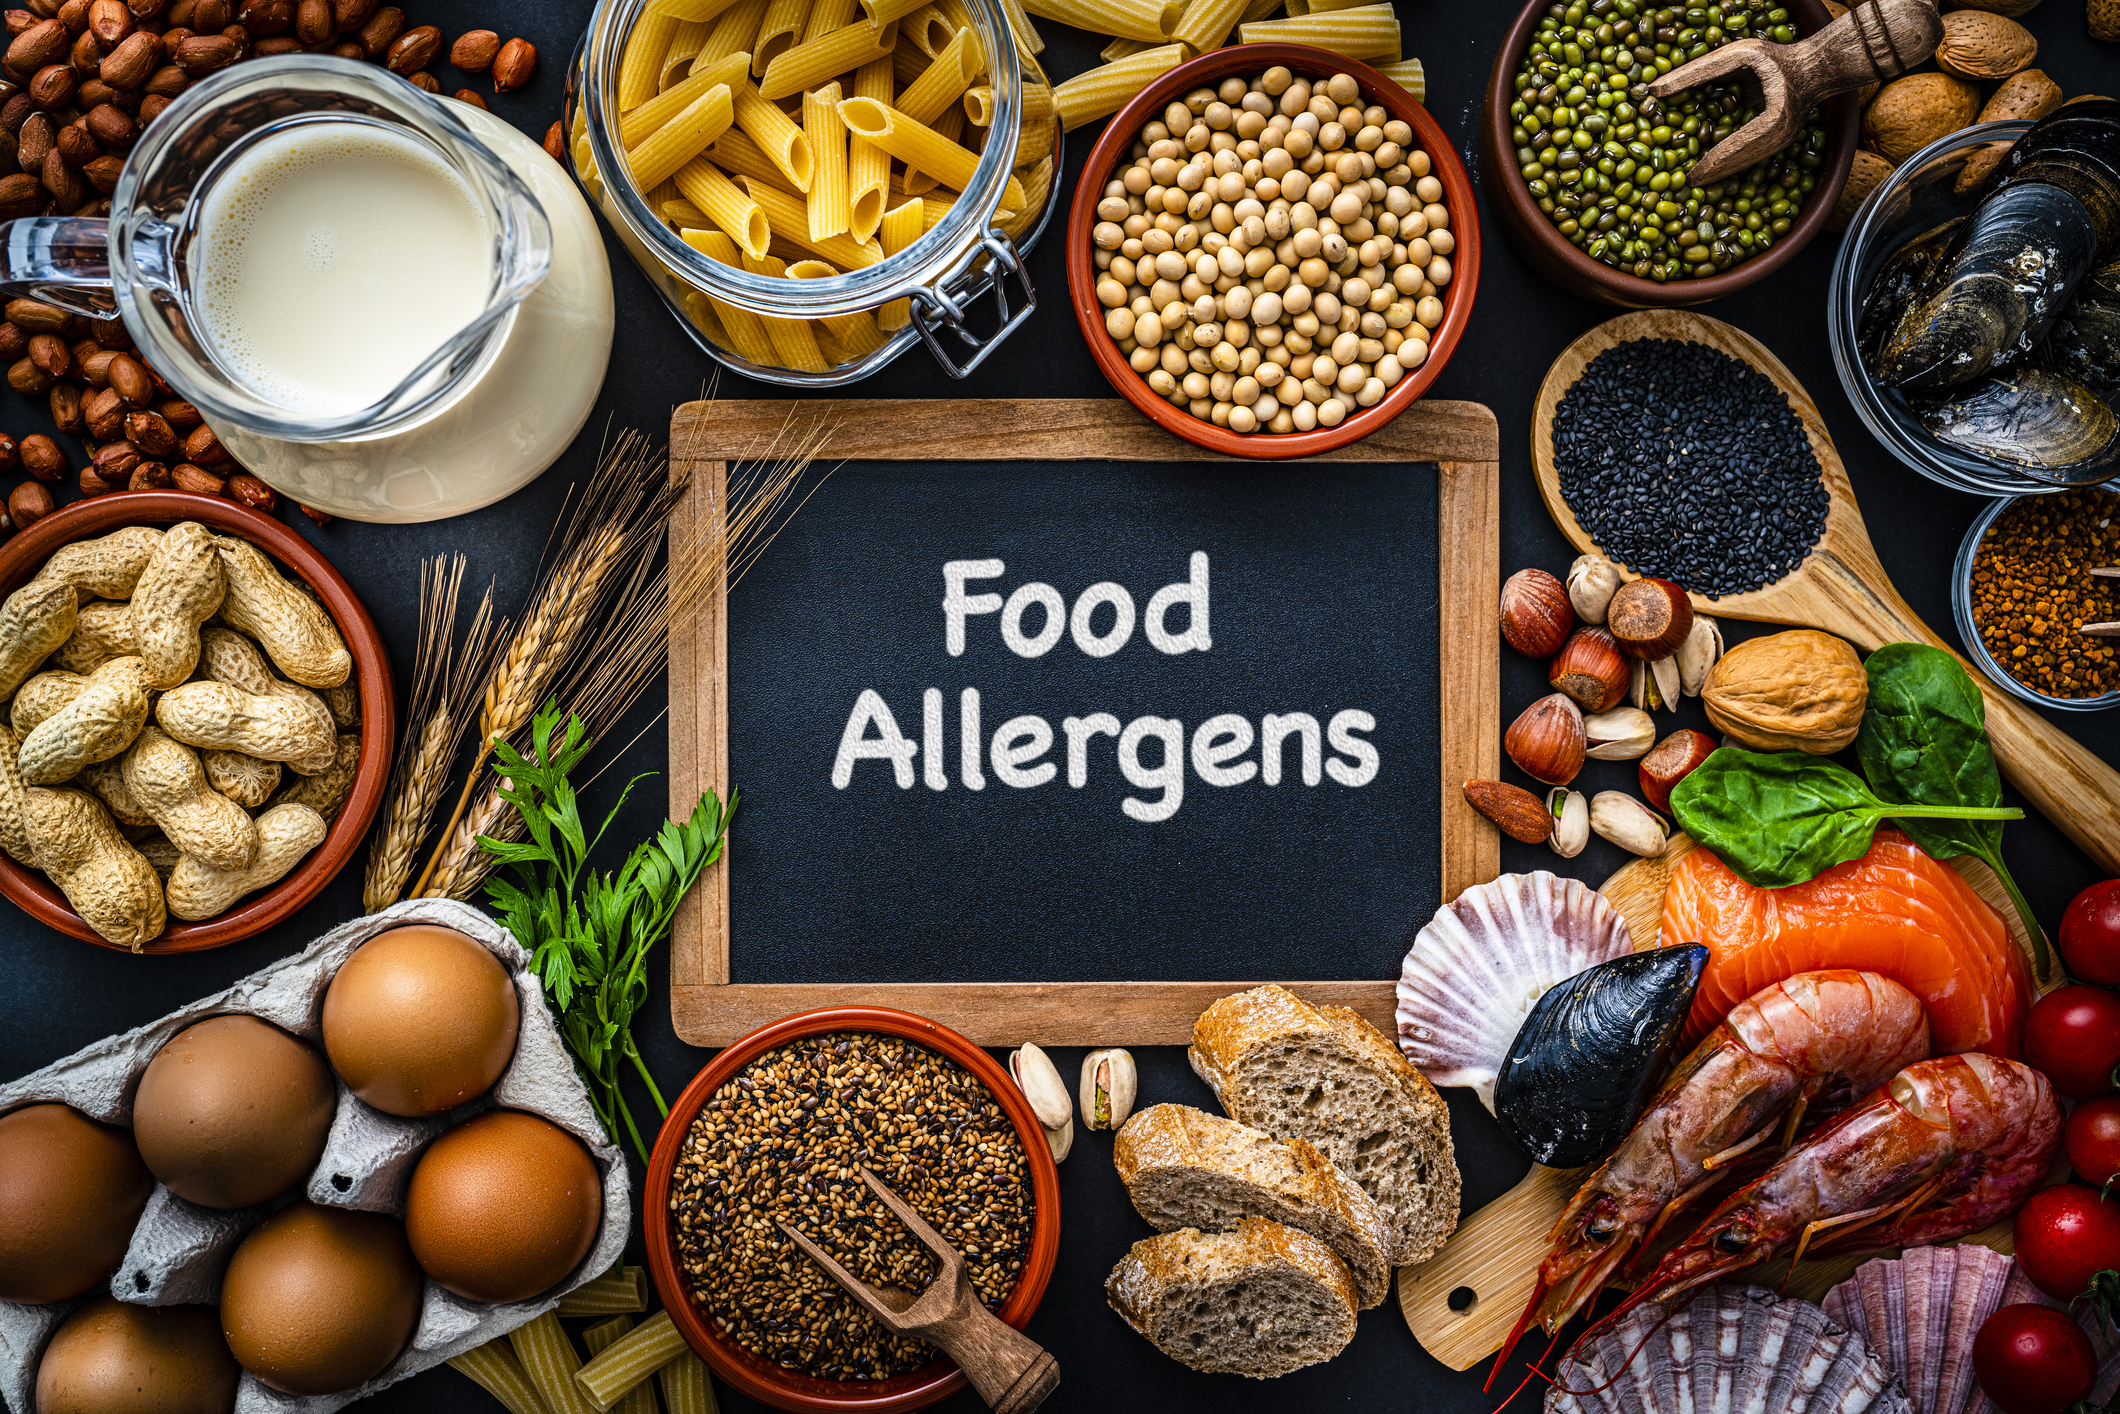 Food allergy testing could relieve your health woes